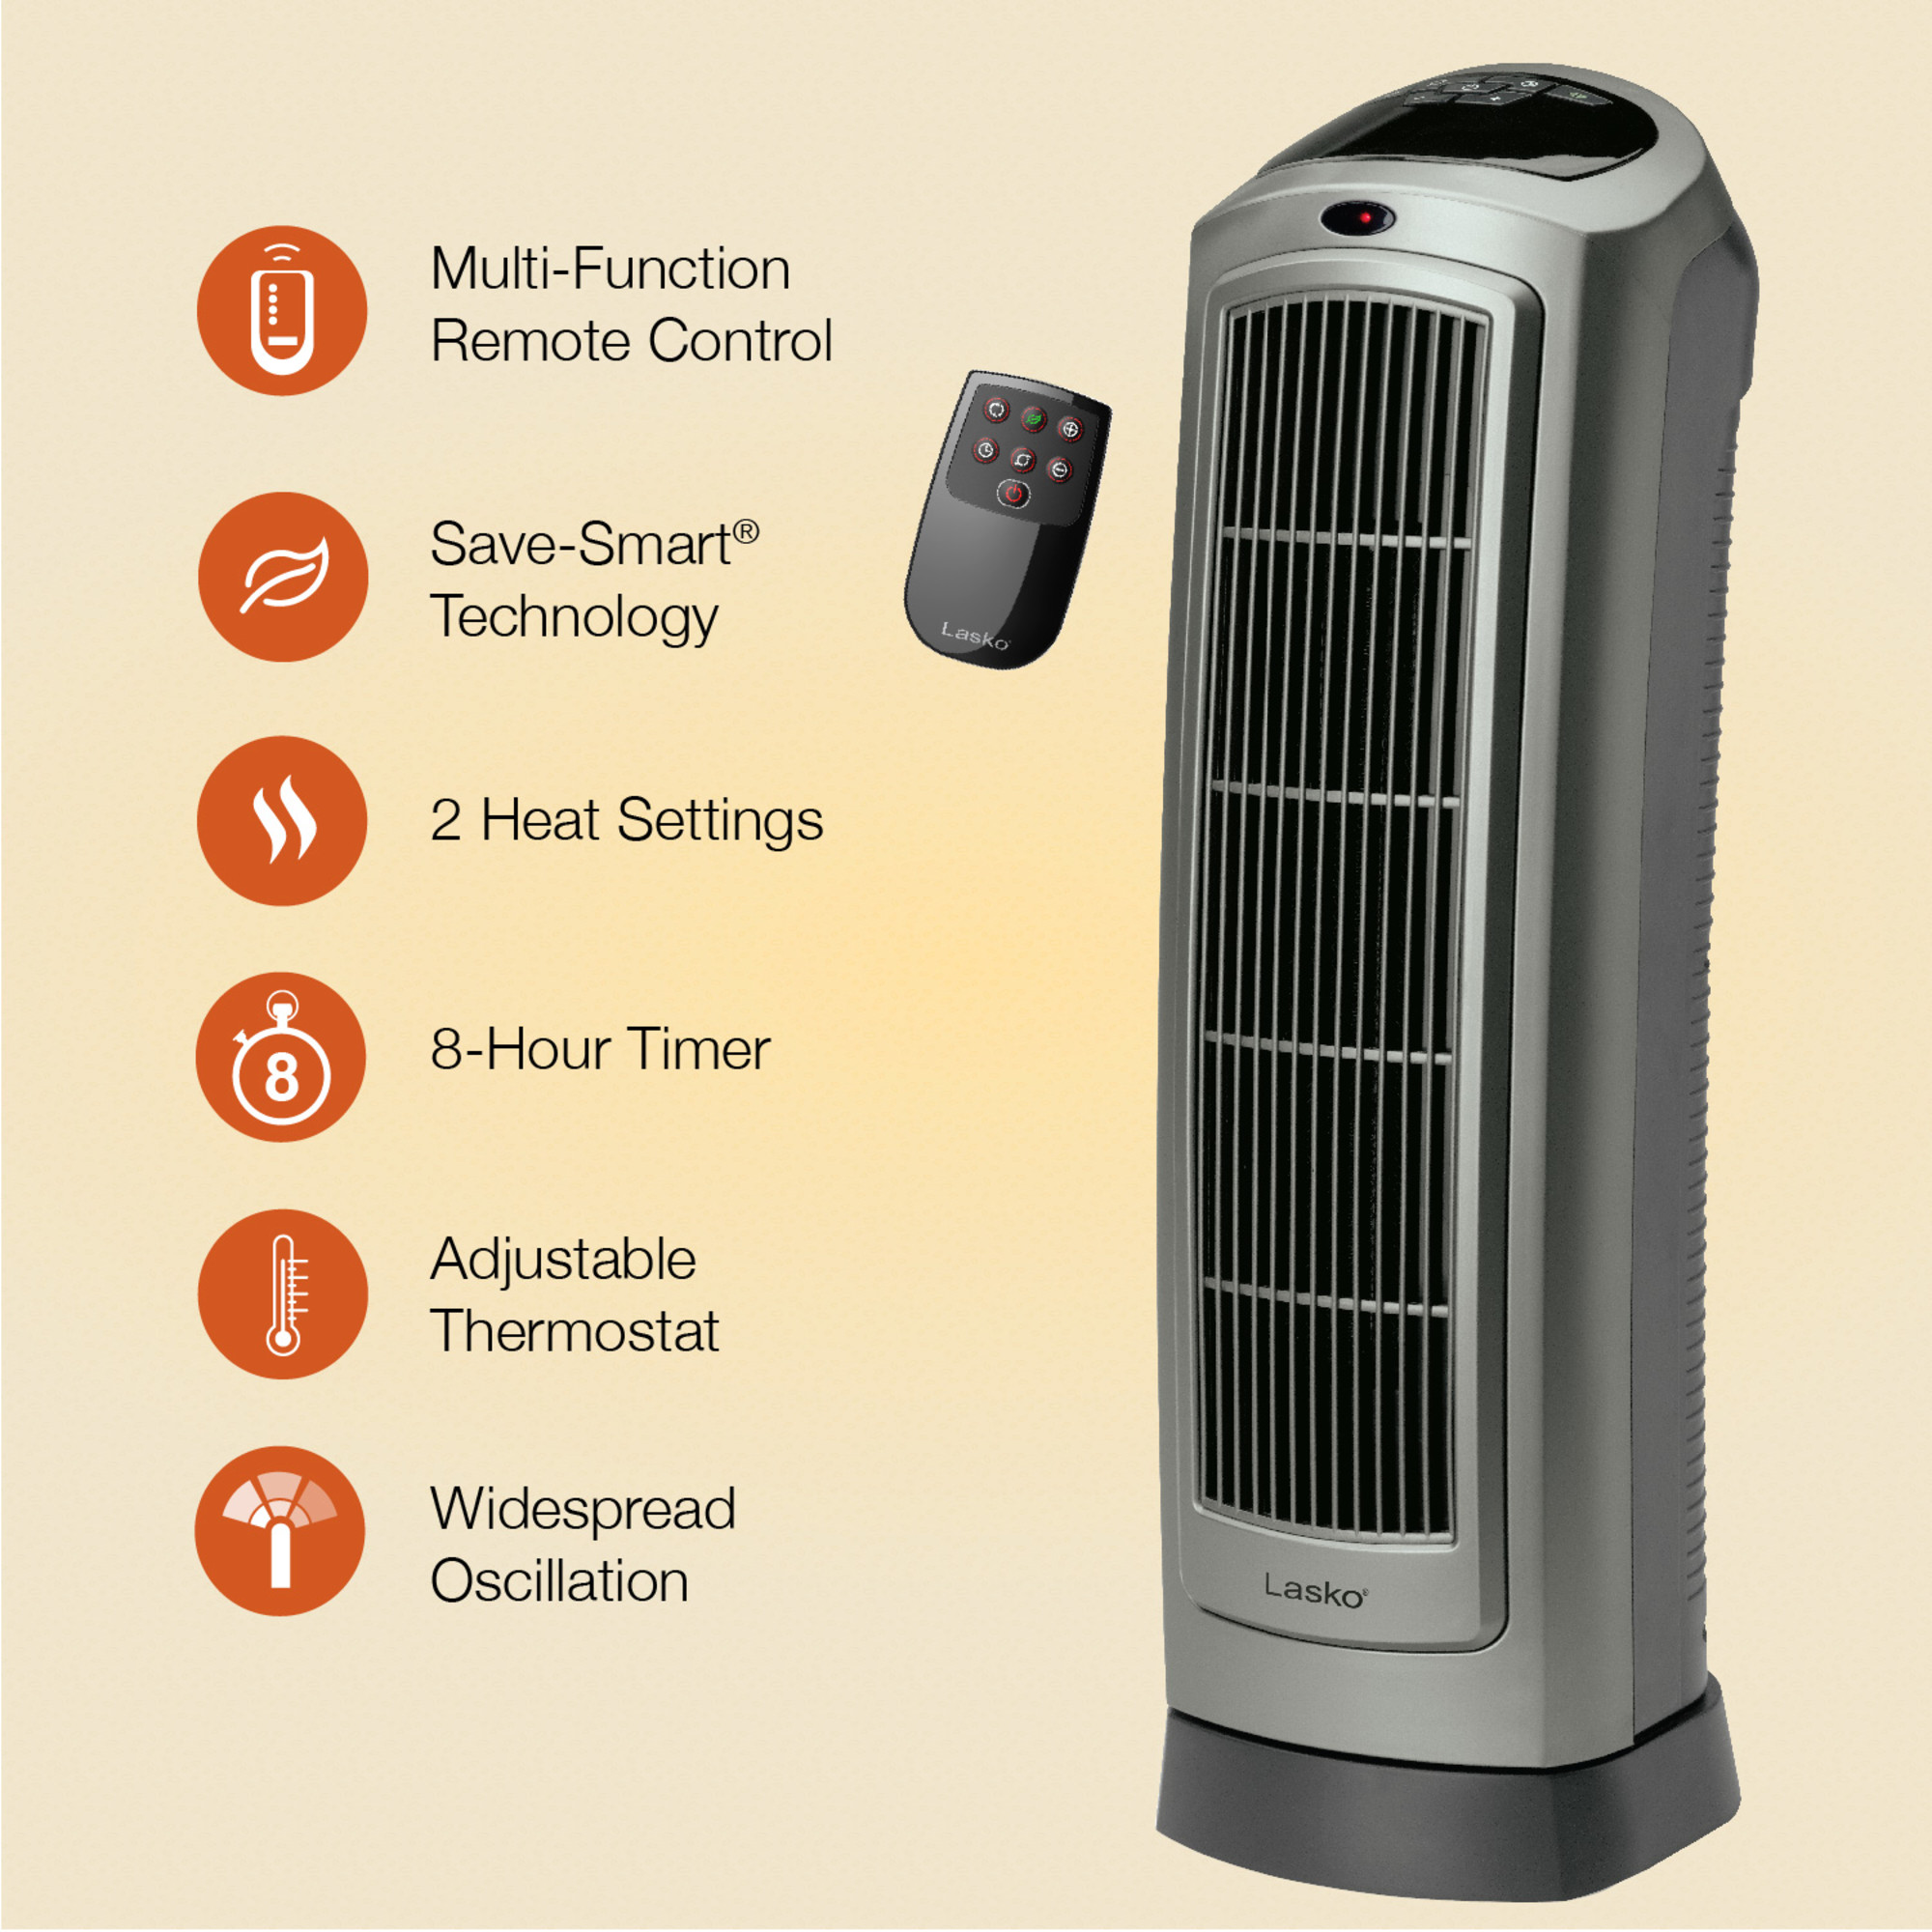 Lasko 22.2" 1500W Oscillating Ceramic Electric Tower Space Heater with Remote, Gray, 5538, New - image 2 of 13